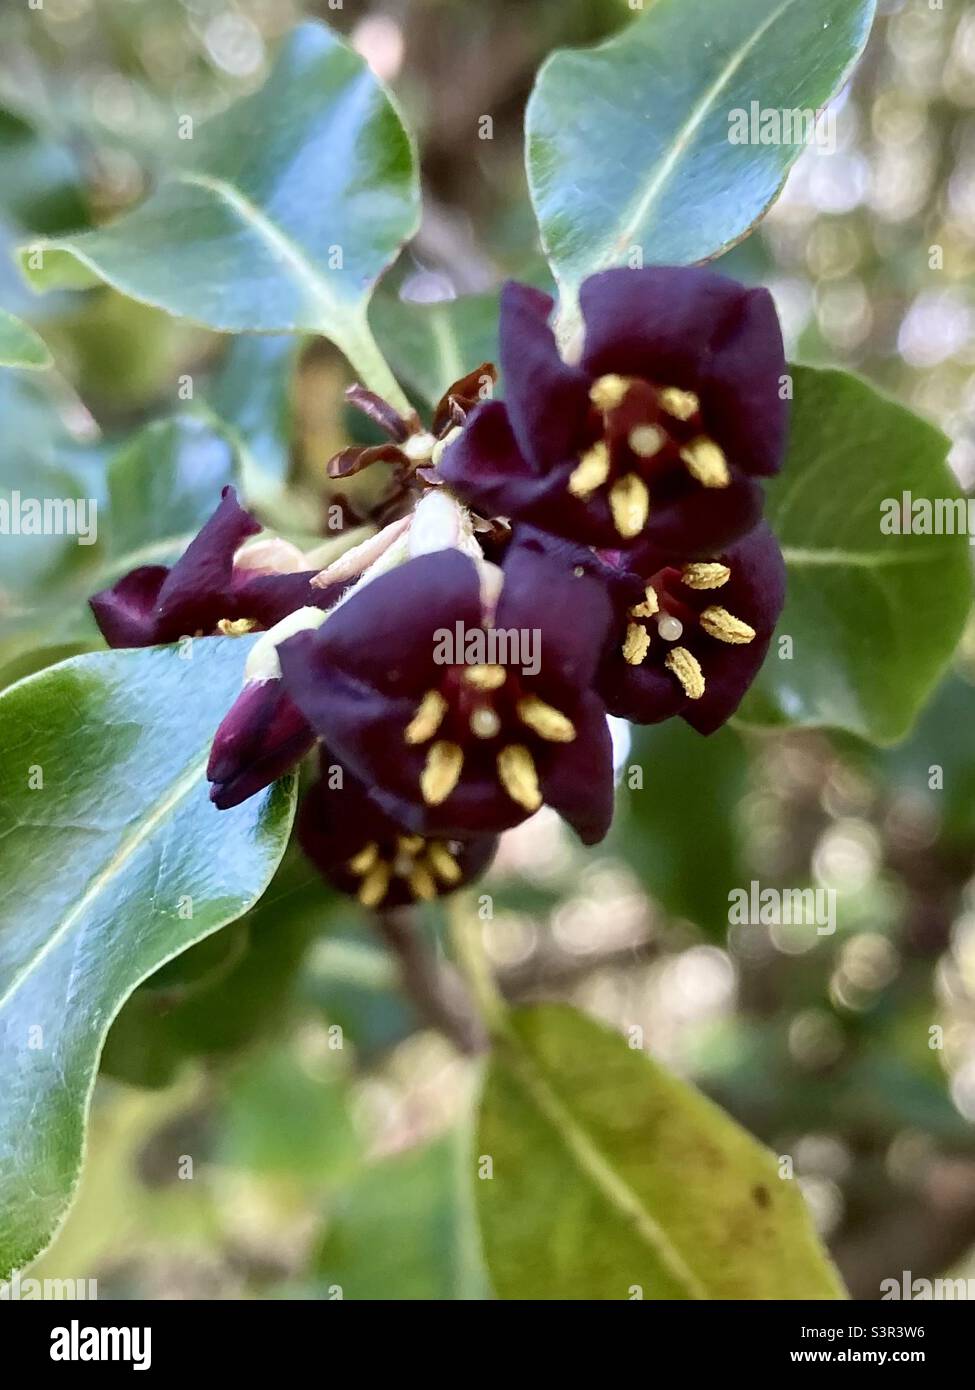 Wild Kohuhu Blossom. Tiny black flowers, scented only at night. This tree growing in the Freshwater area of The Isle of Wight, April 2022. Kohuhu is a Māori name. Stock Photo